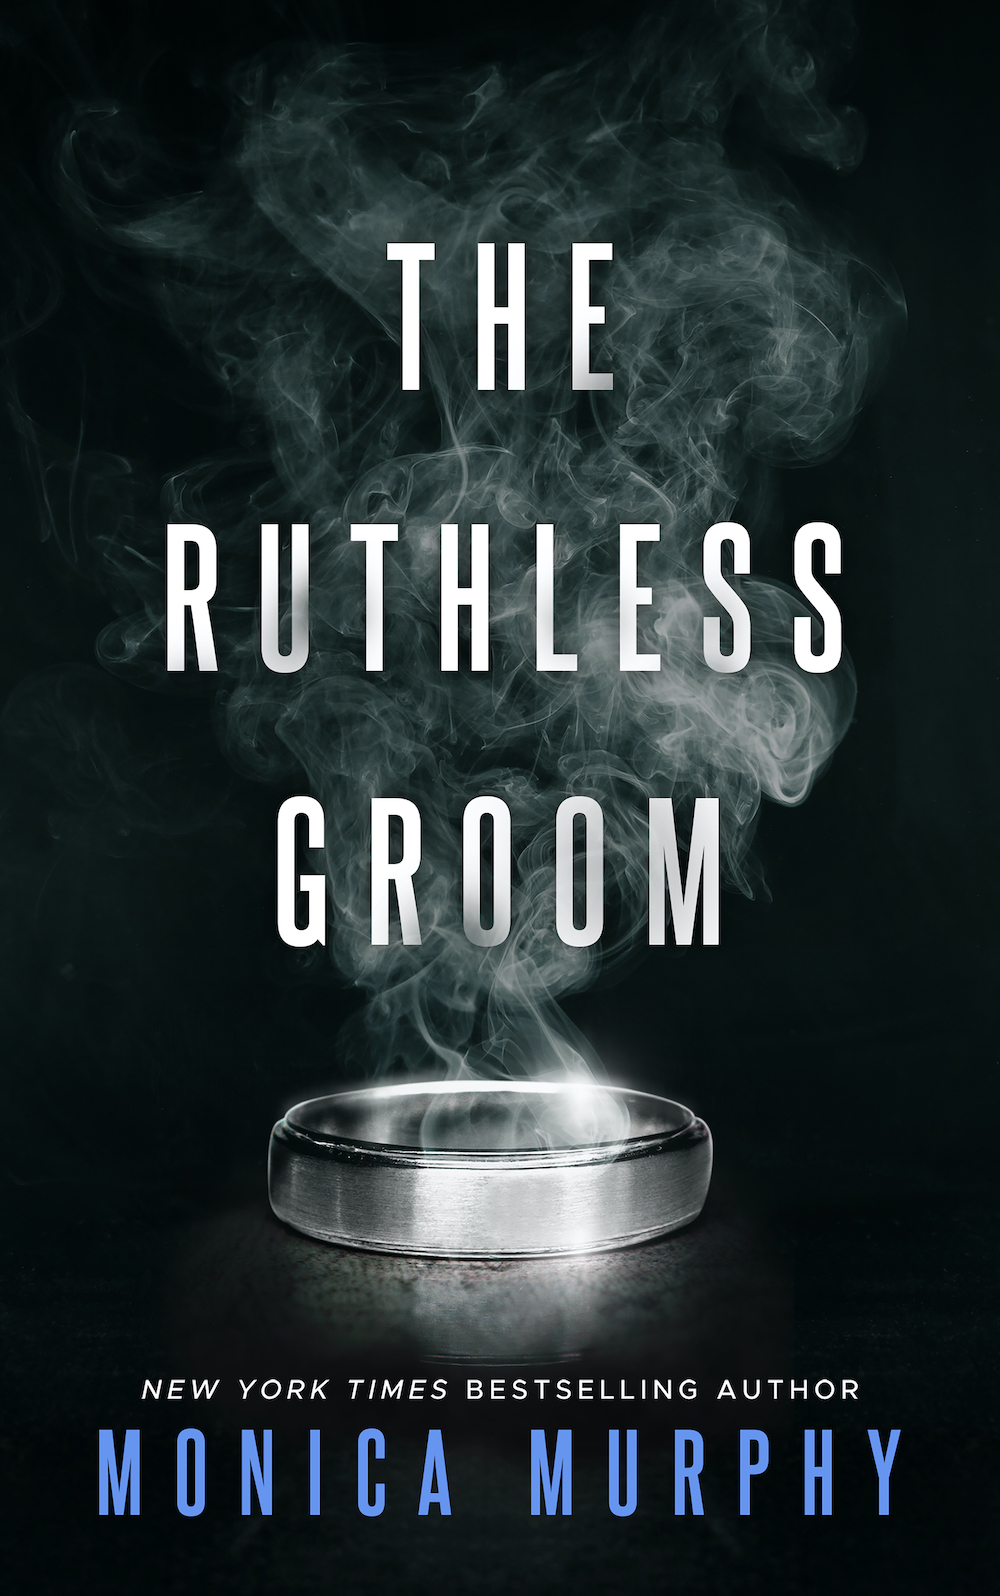 The Ruthless Groom by Monica Murphy